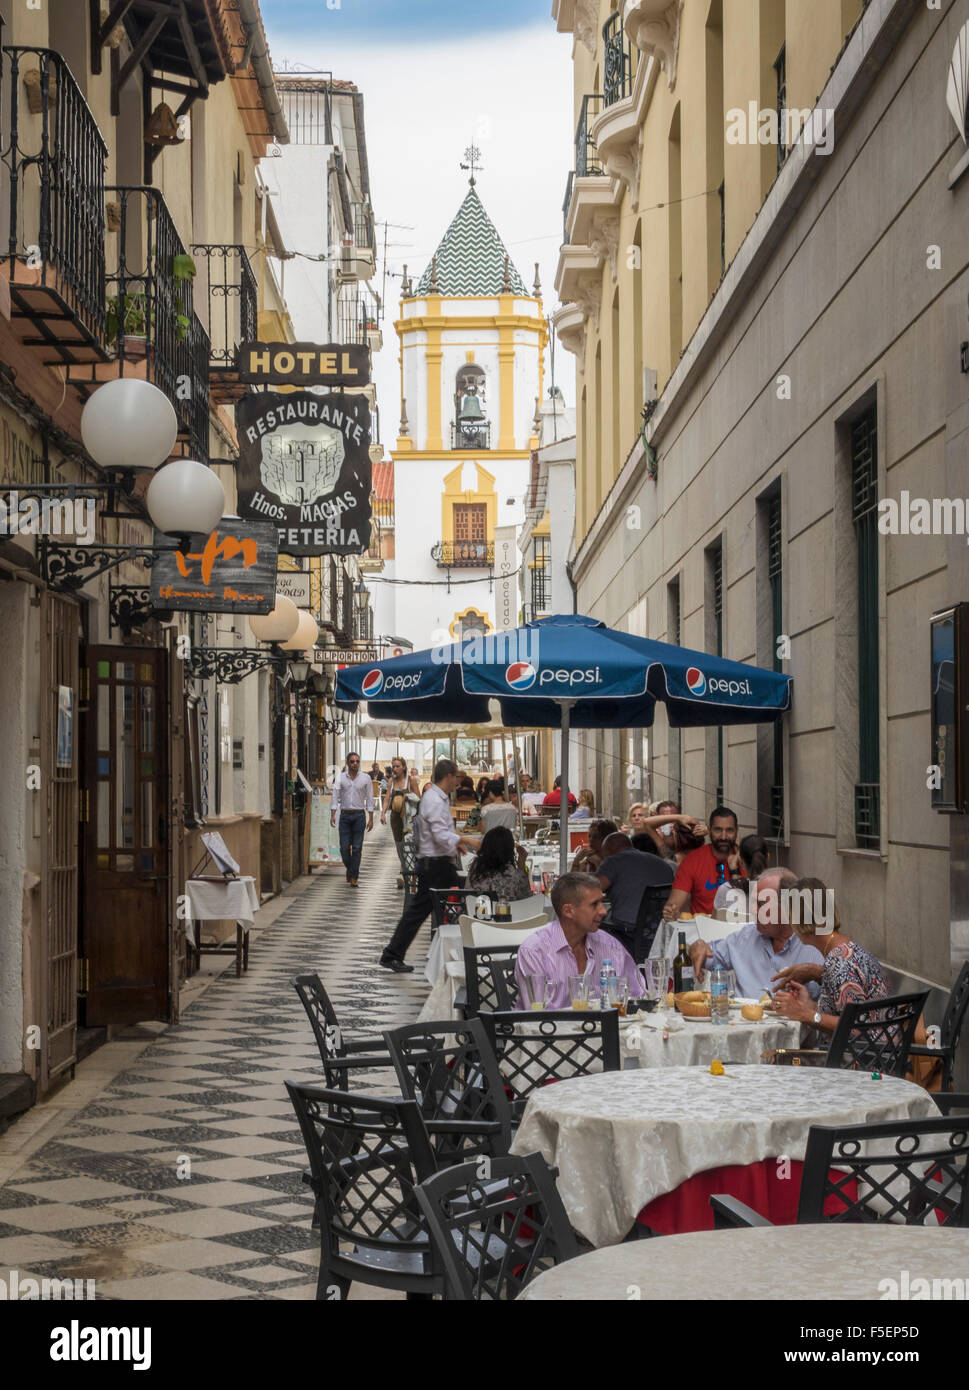 Ronda, Andalucia, Spain - restaurants and street cafes by the Plaza del Socorro, Ronda town, Spain Stock Photo